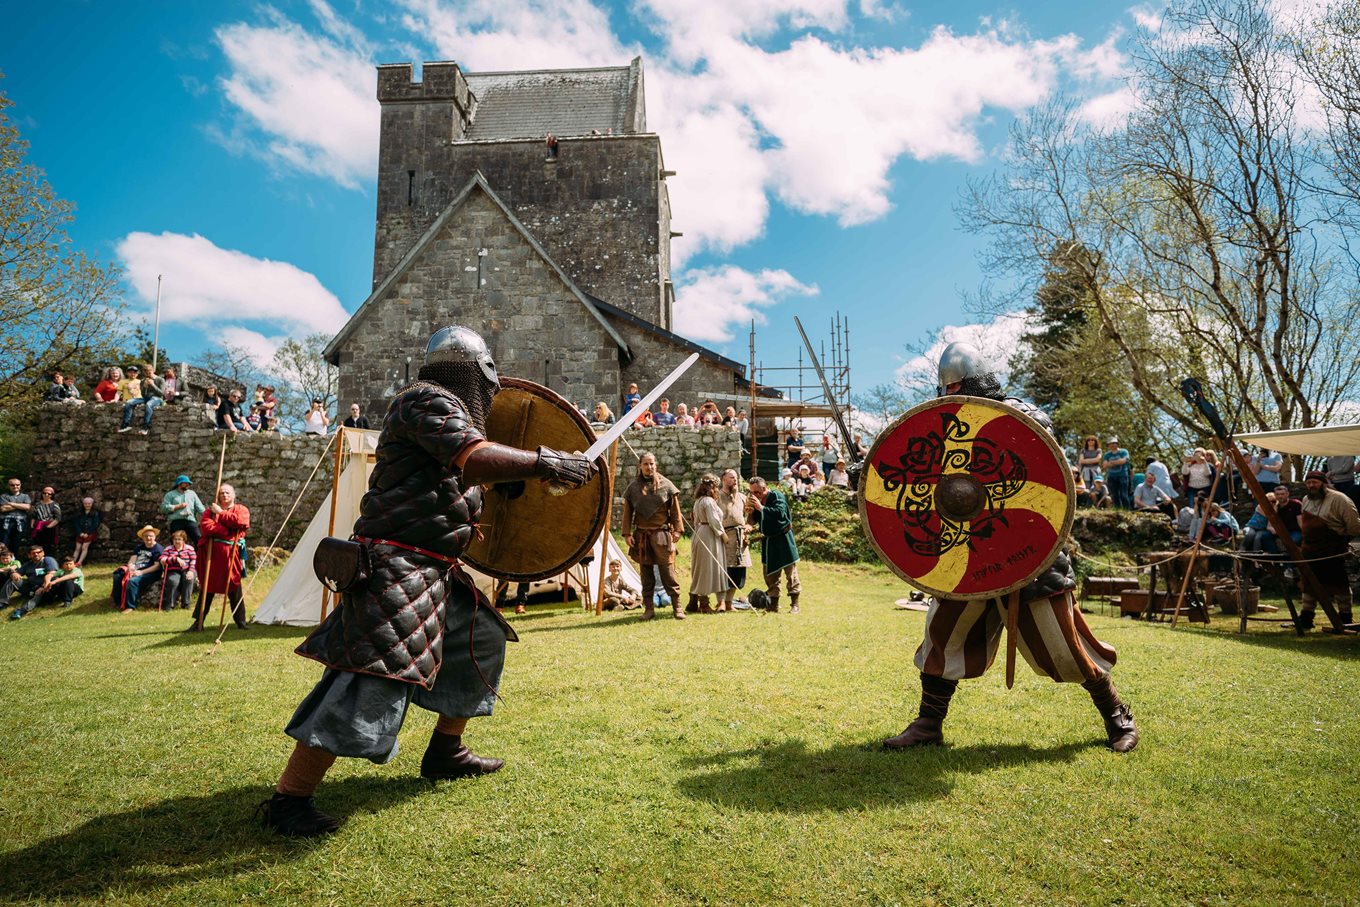 Viking invasion planned for Bank holiday weekend